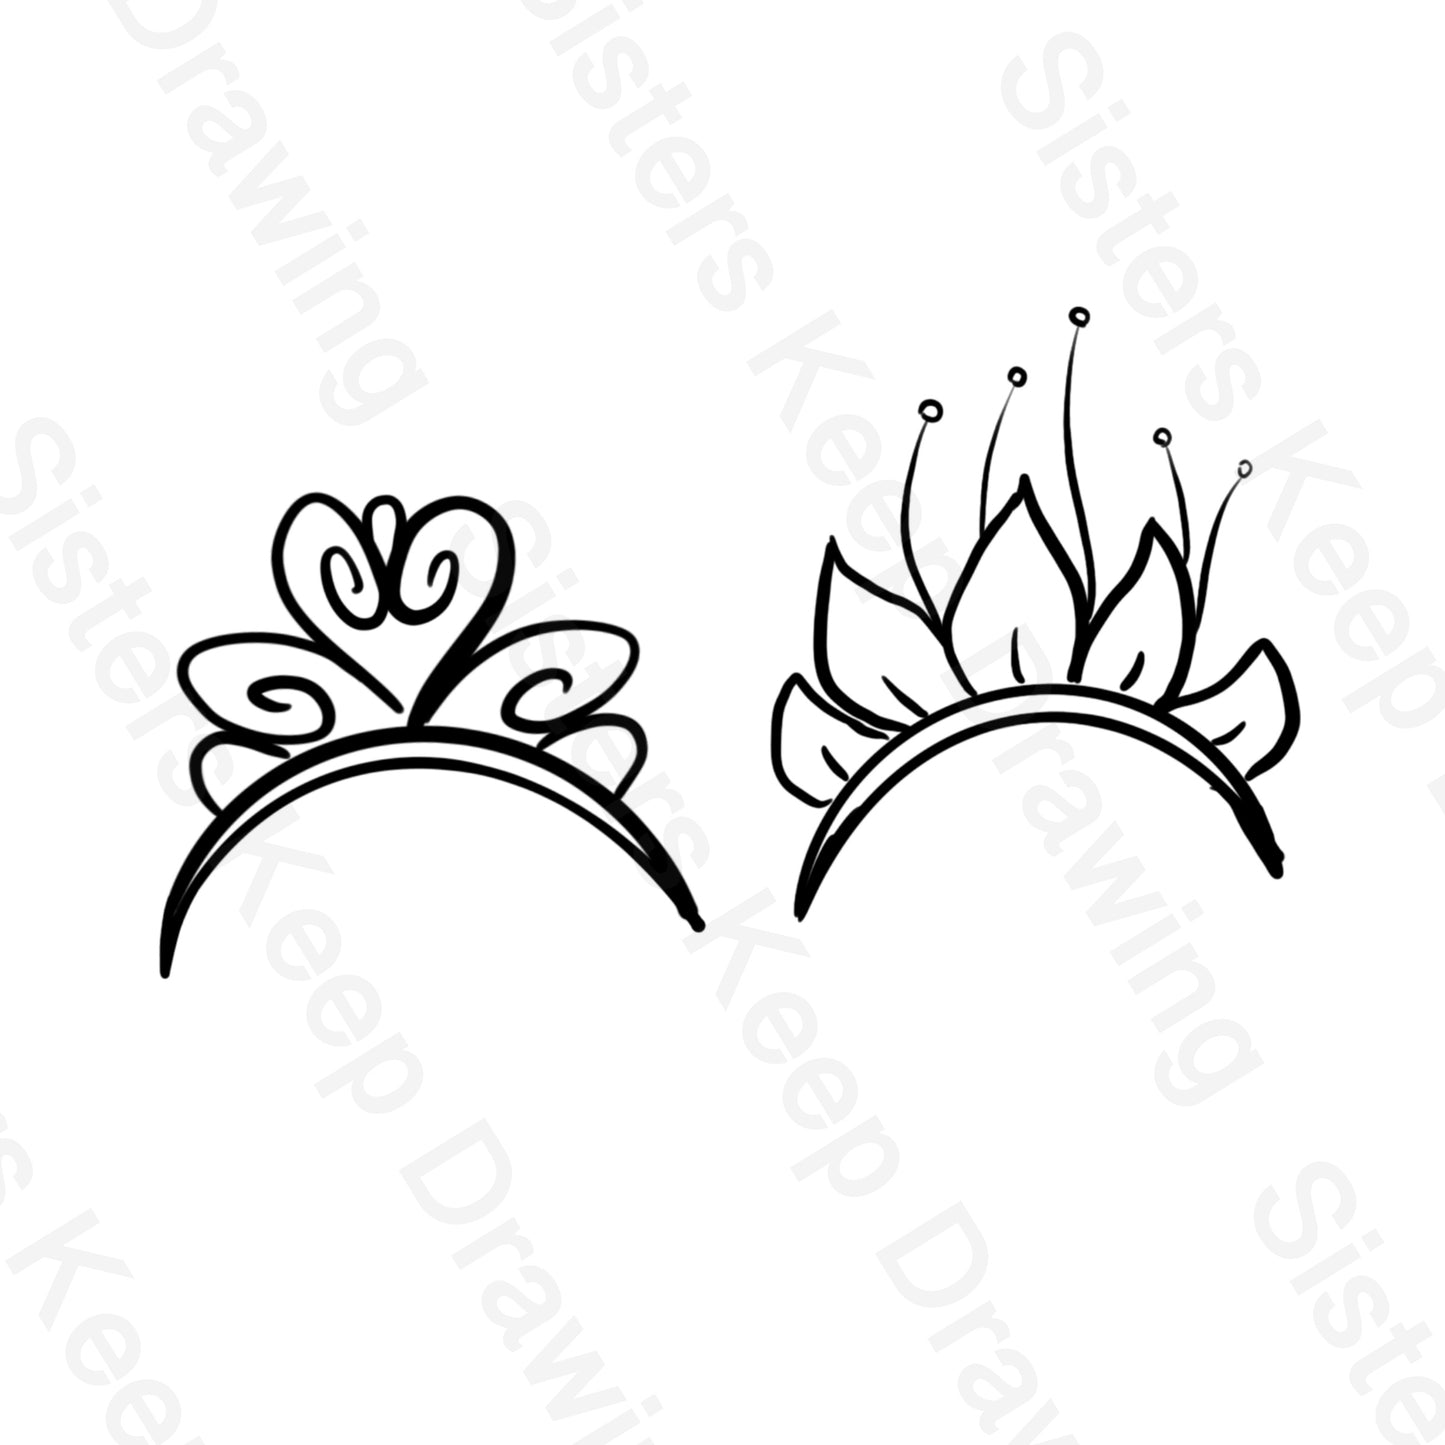 Lottie and Tiana's Crowns - Princess and the Frog - Tattoo Transparent Permission PNG- instant download digital printable artwork